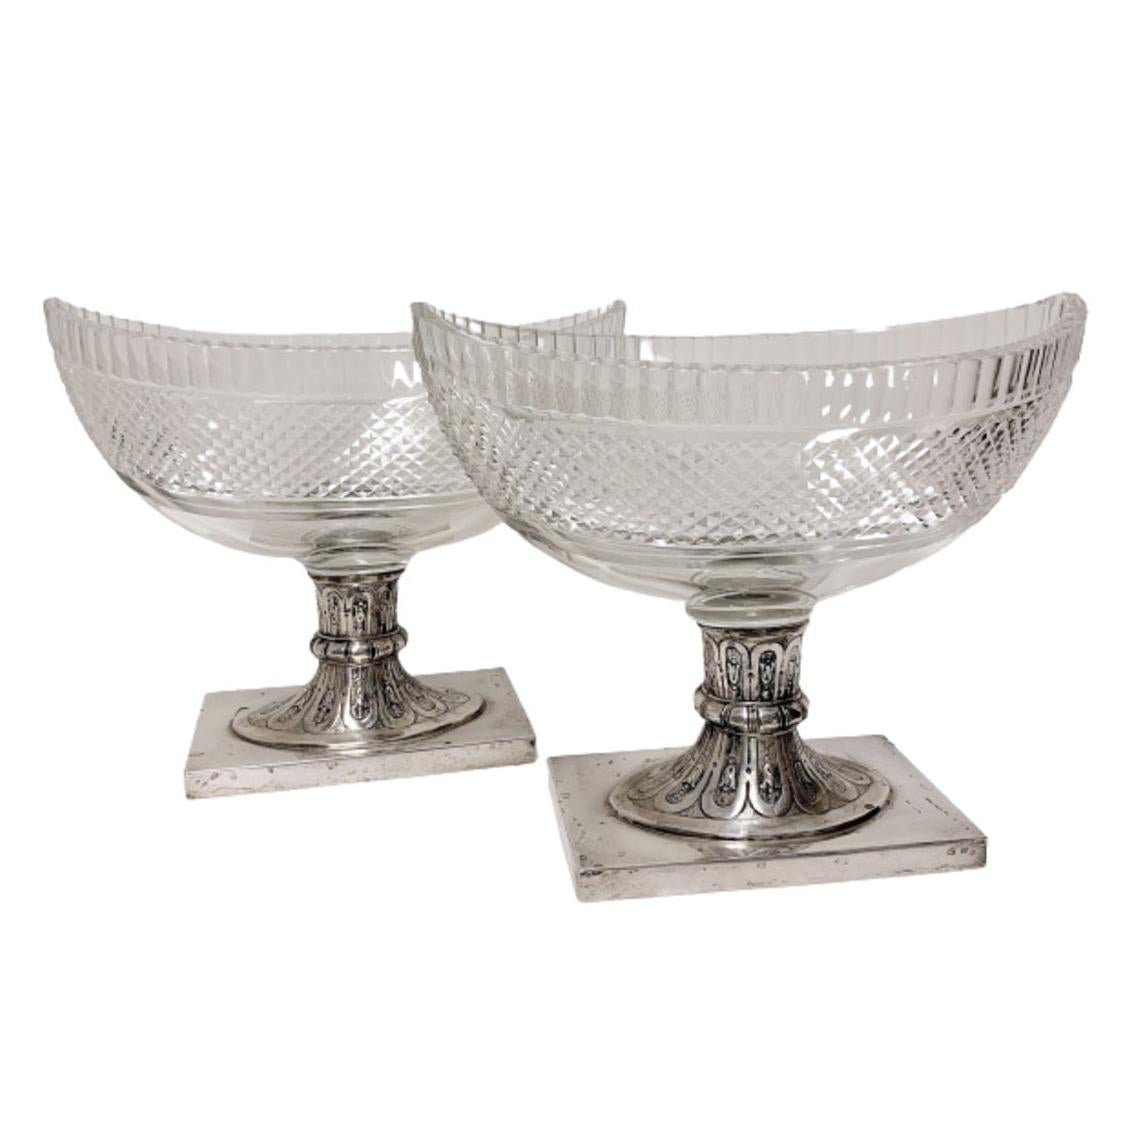 Large Glass Flower Stand. Silver Metal foot with Pedestal. Punch.. Французский меркурий